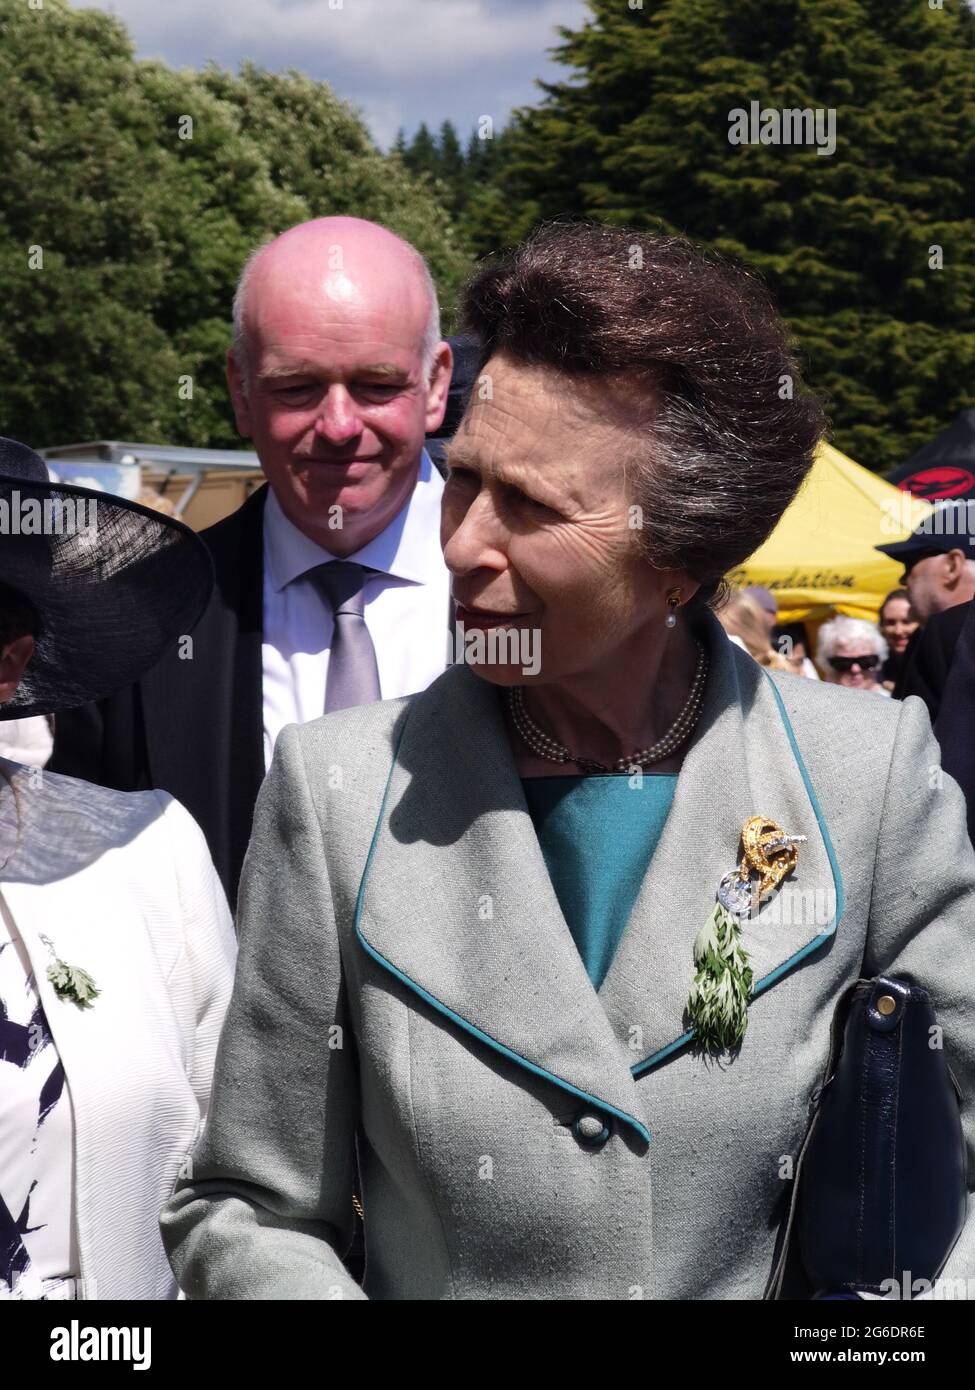 5 July 2021, St Johns, Isle of Man. No social distancing or masks. Her Royal Highness, Princess Anne, Princess Royal of the United Kingdom accompanied by Howard Quayle, Chief Minister of the Isle of Man, greeting people at a Tynwald Fair on an official visit to the Isle of Man where she presided over the open air sitting of Tynwald (the Parliament of the Isle of Man. She is shown visiting a local farm shop at the Tynwald fair. The Isle of Man opened borders to non-residents on 28 June 2021 and has very few social distancing requirements (https://covid19.gov.im/). Stock Photo